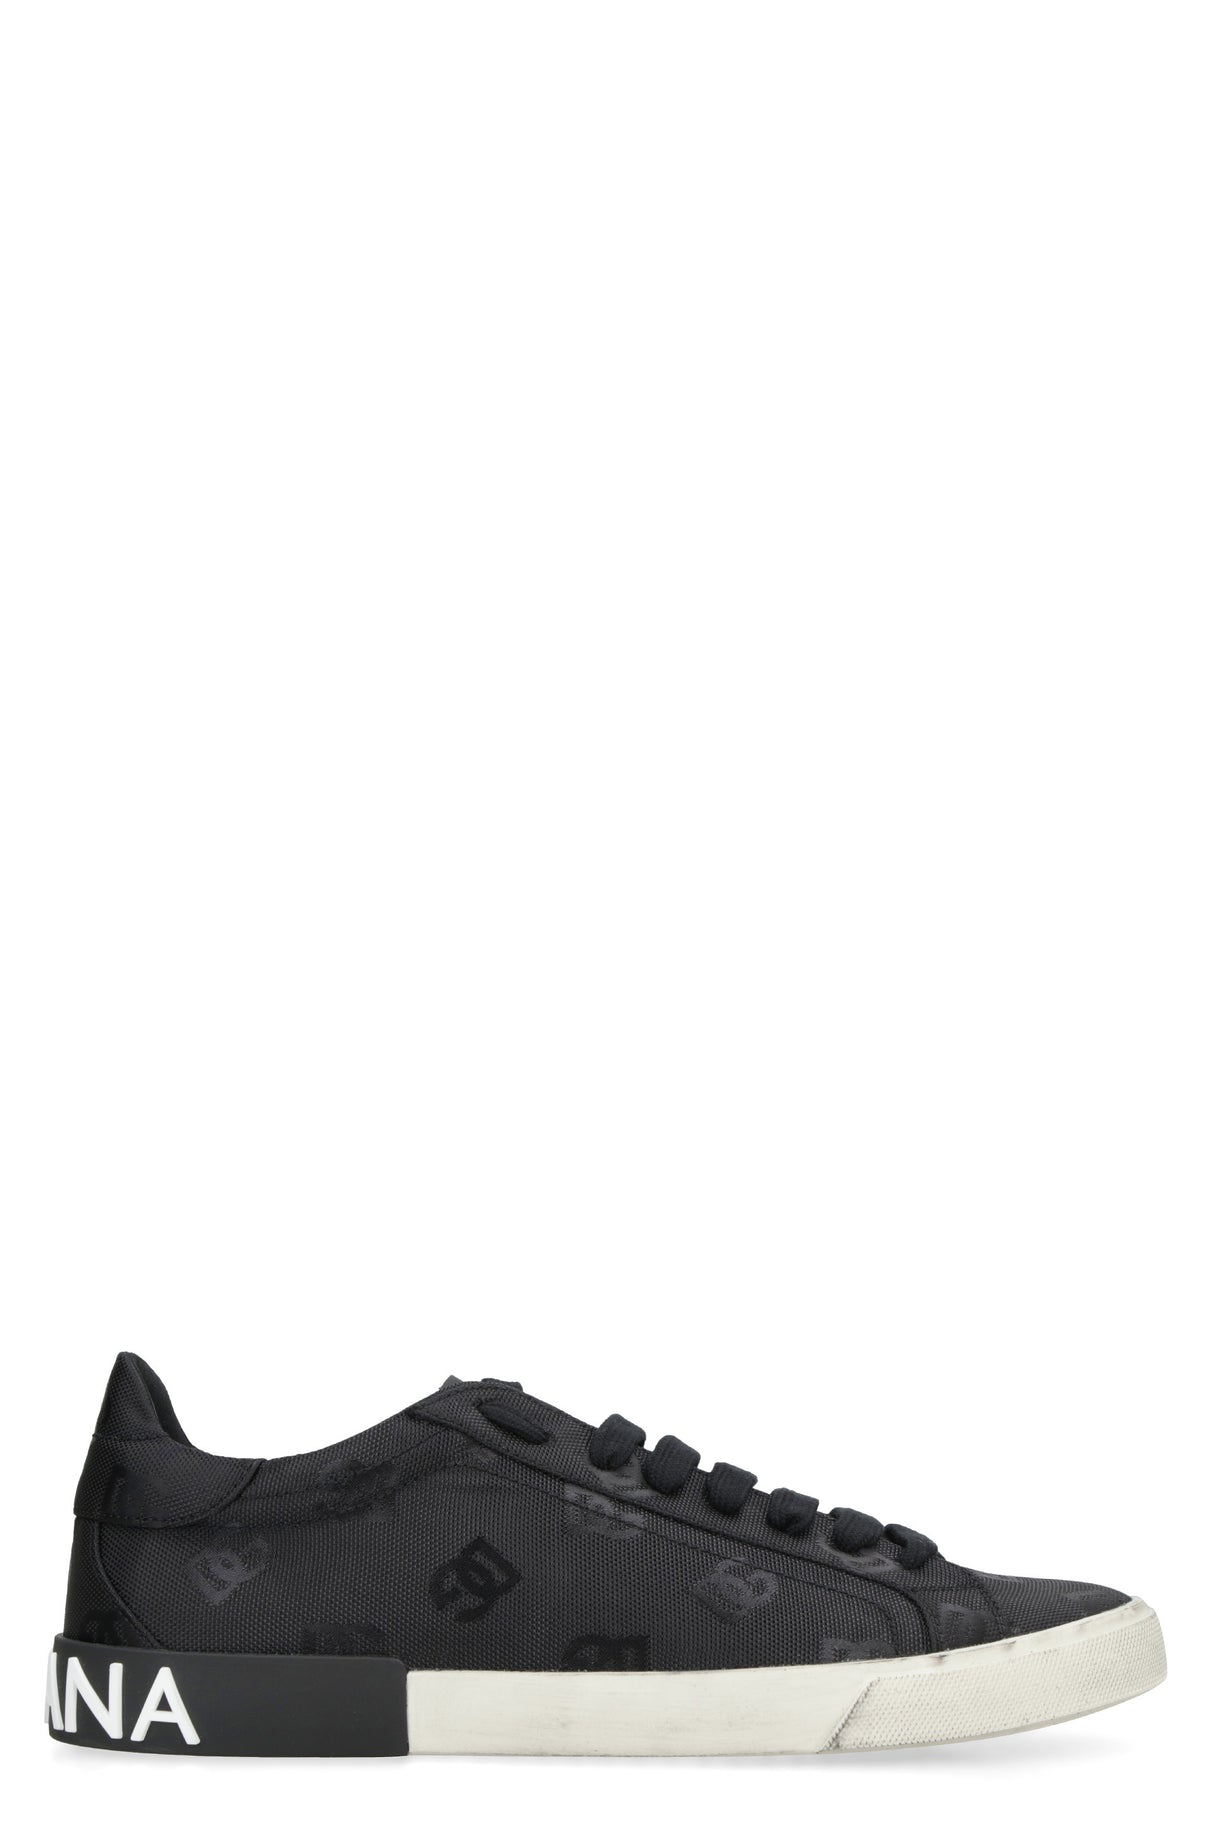 DOLCE & GABBANA Stylish Black Low-Top Sneaker for Men - FW23 Collection